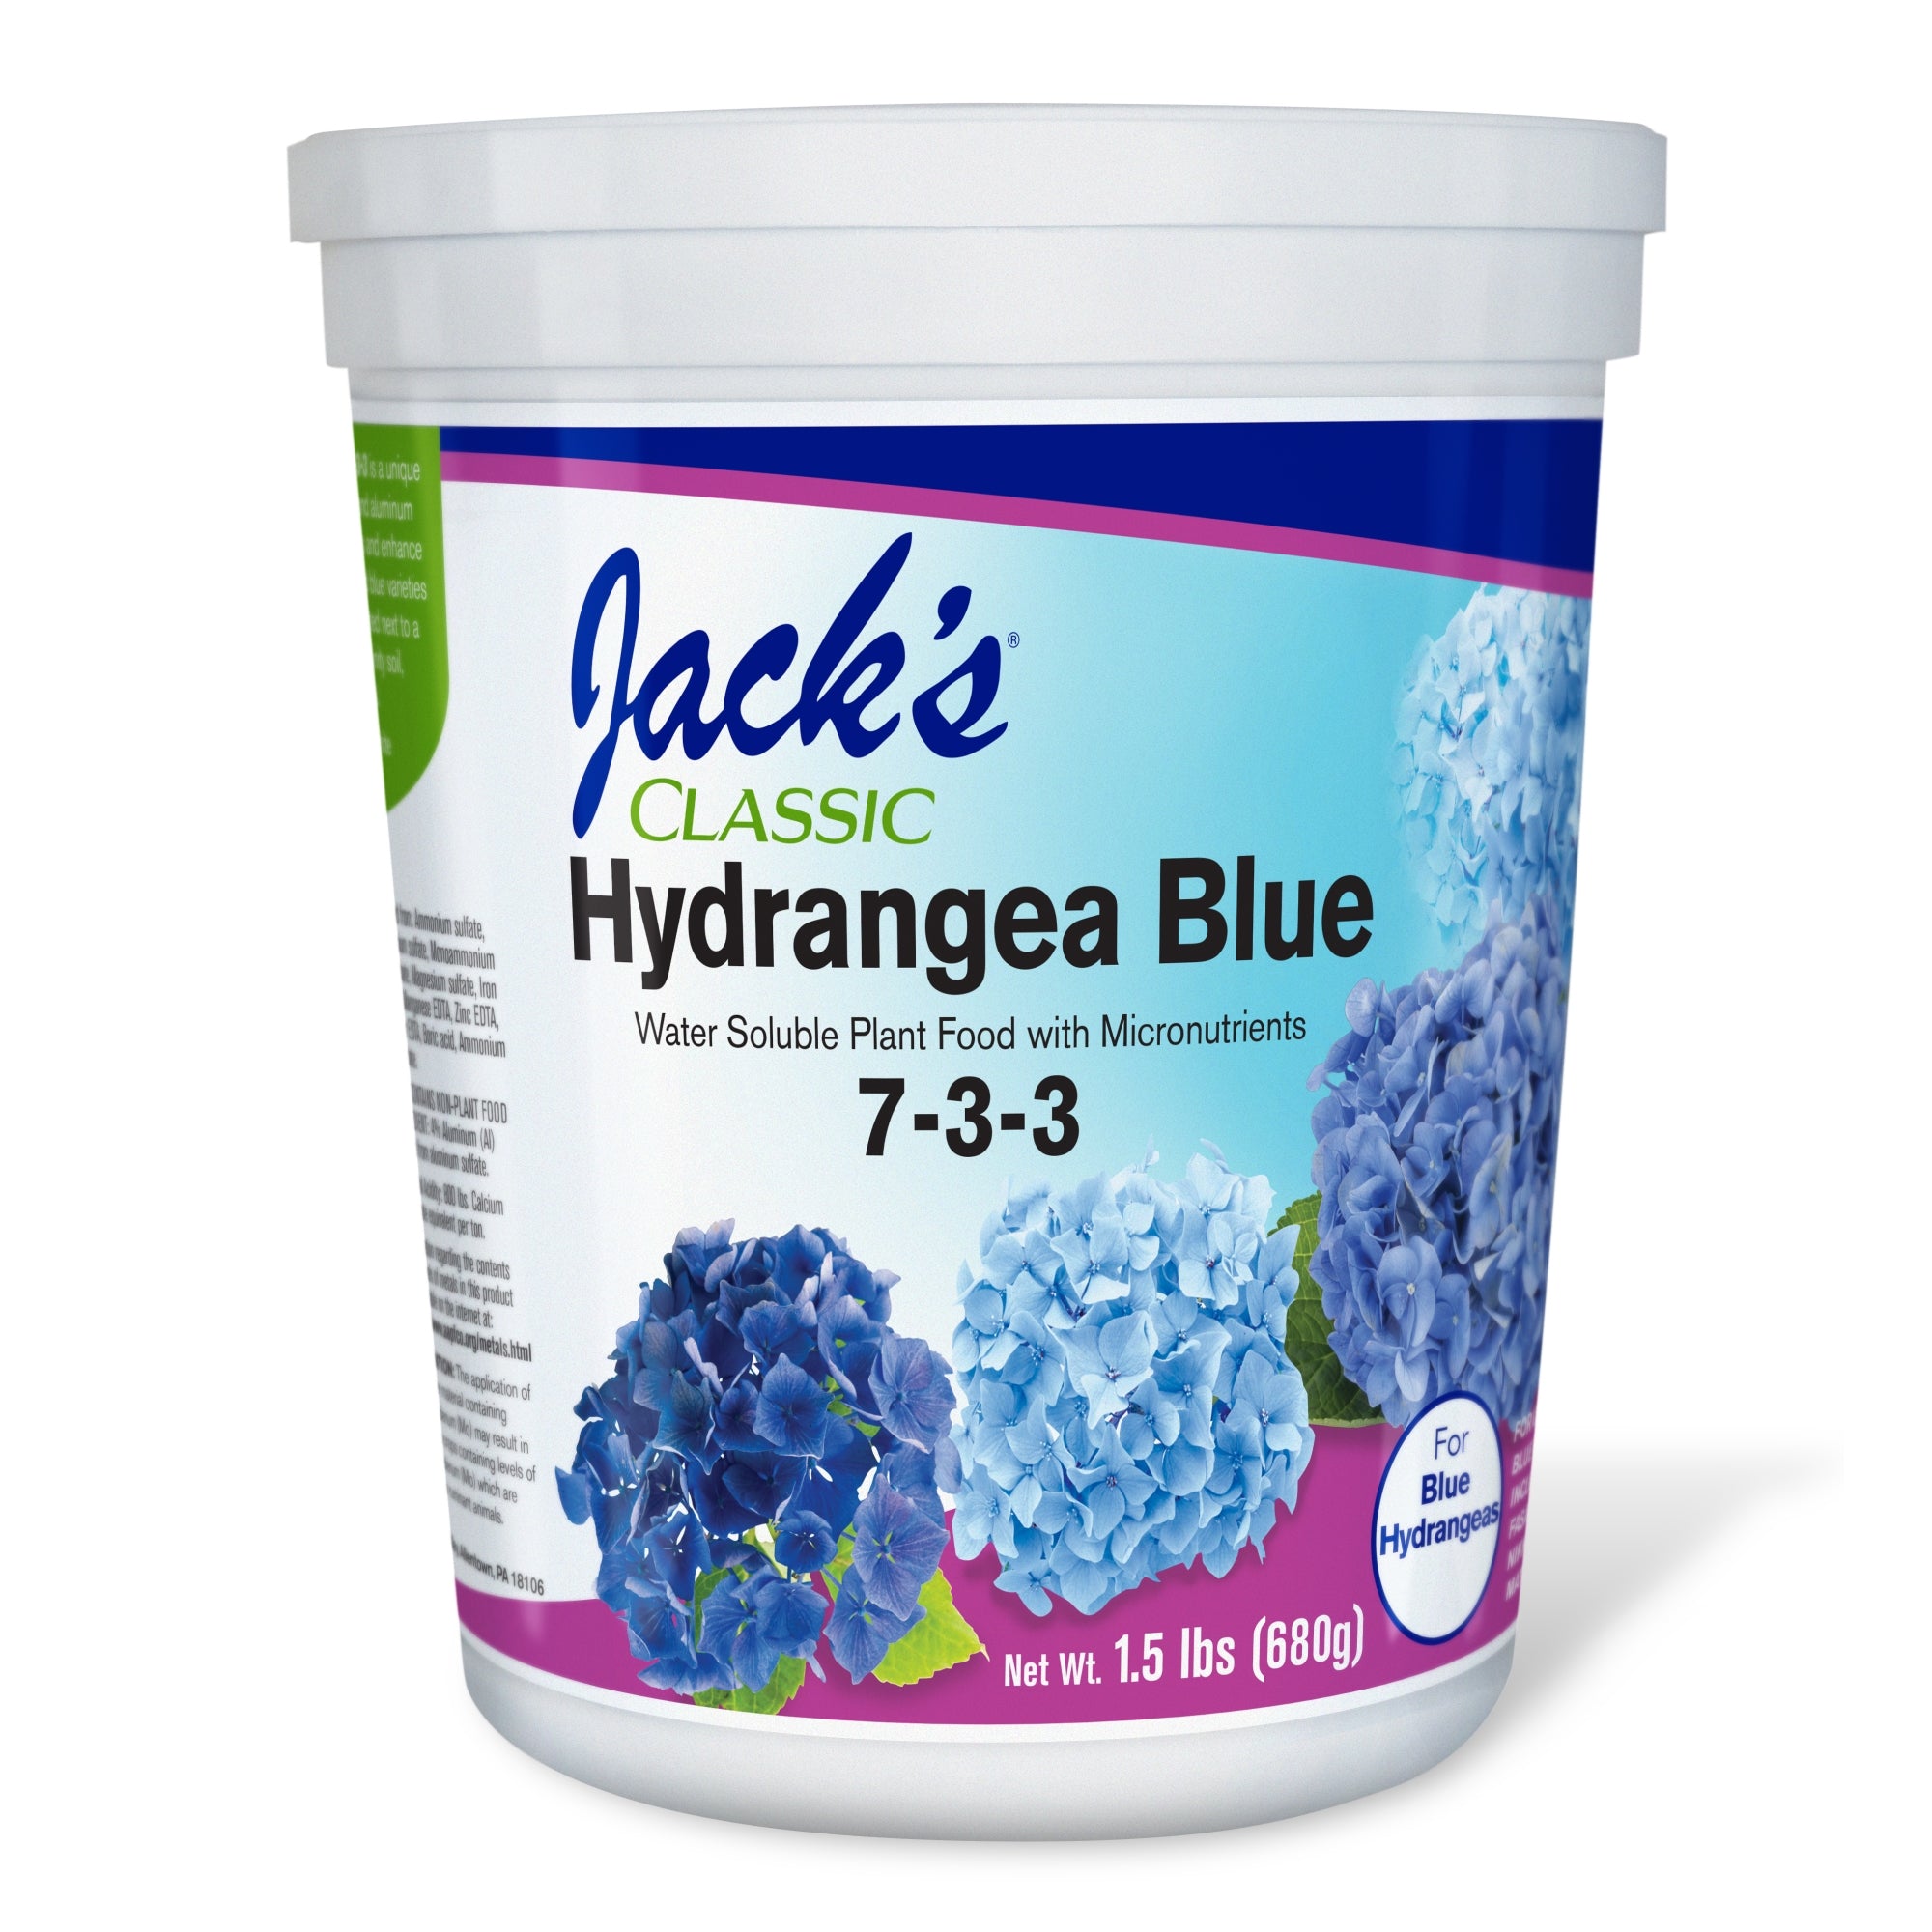 Jack's Classic 7-3-3 Hydrangea Blue Water-Soluble Fertilizer with Micronutrients to Enhance Blue Flowers, 1.5lbs